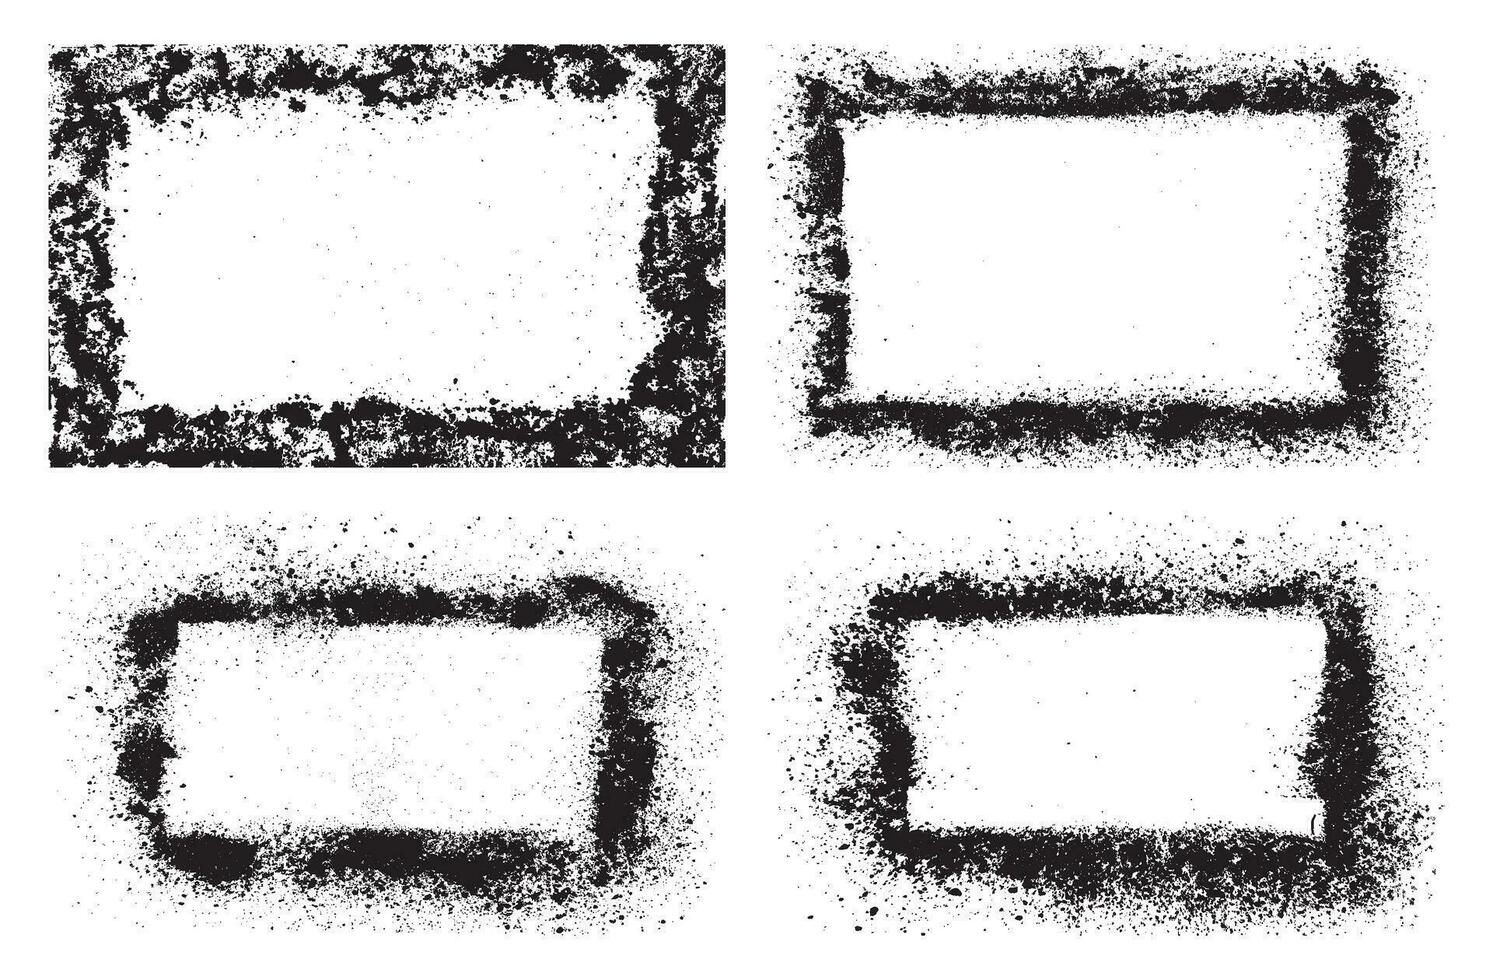 Grunge texture effect set. Distressed overlay rough textured. Abstract vintage monochrome. Black edges isolated on white background. Graphic design halftone style concept for banner, flyer, etc vector